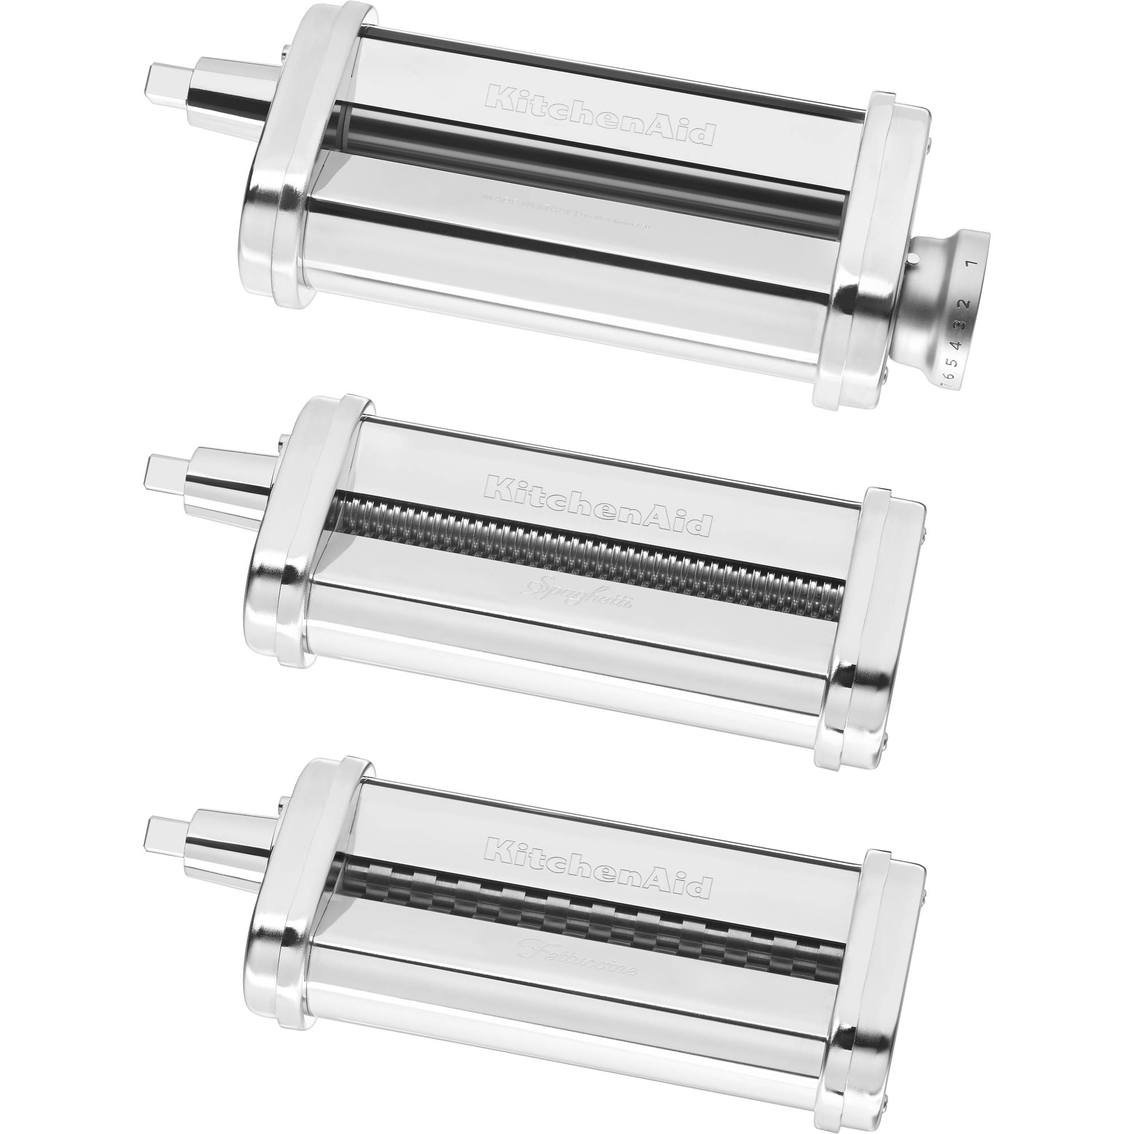 KitchenAid Pasta Roller and Cutter Set Accessory - Image 1 of 3